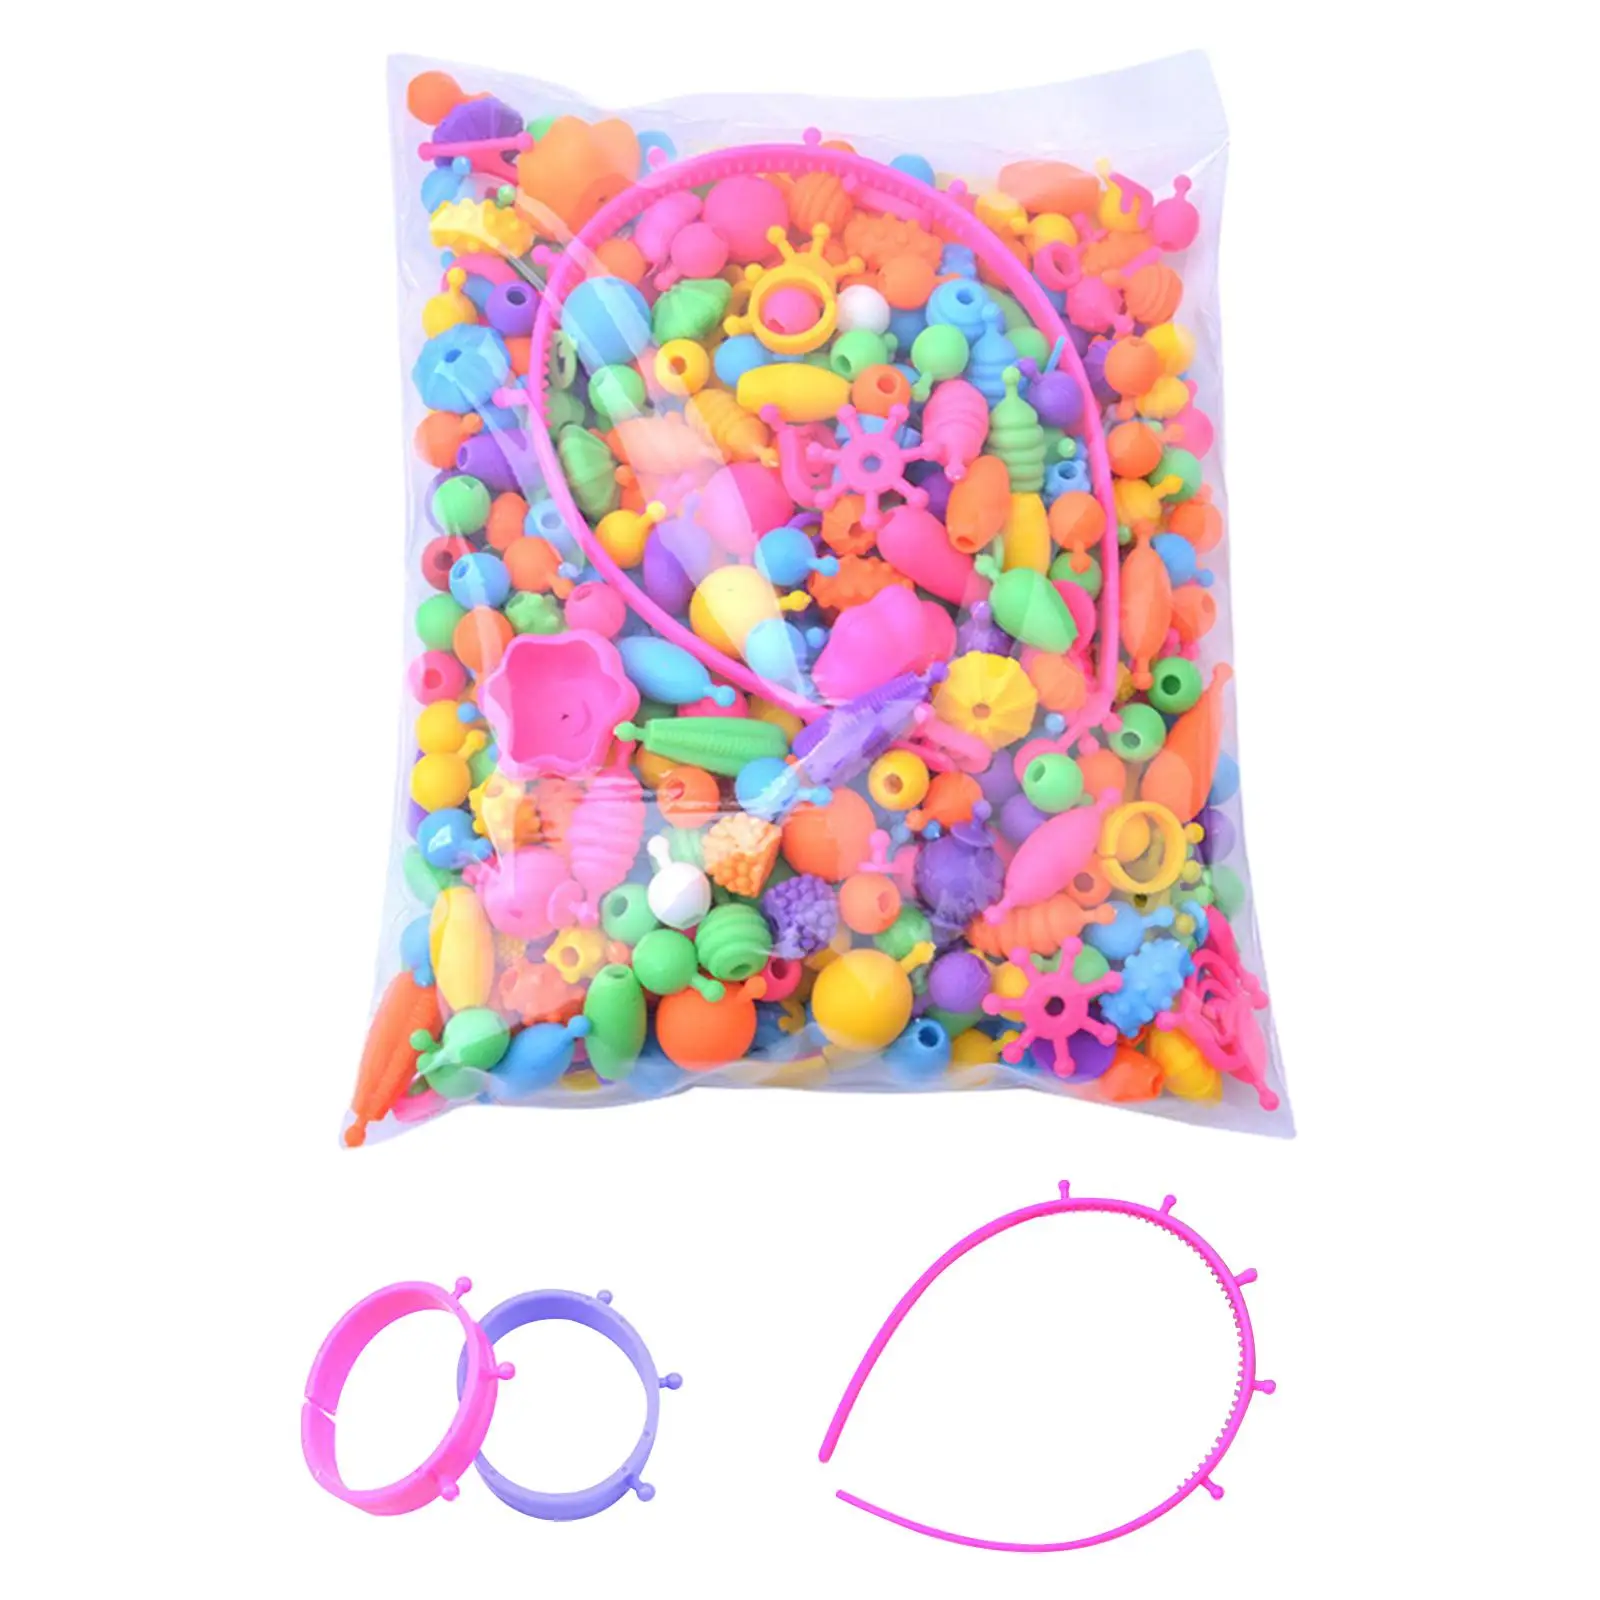 Beads for Kids Jewelry Making Kit DIY Jewelry Set Arts Bead Kit Snap Bead Crafts Toys for Necklace Earrings Hairband Gift Girls